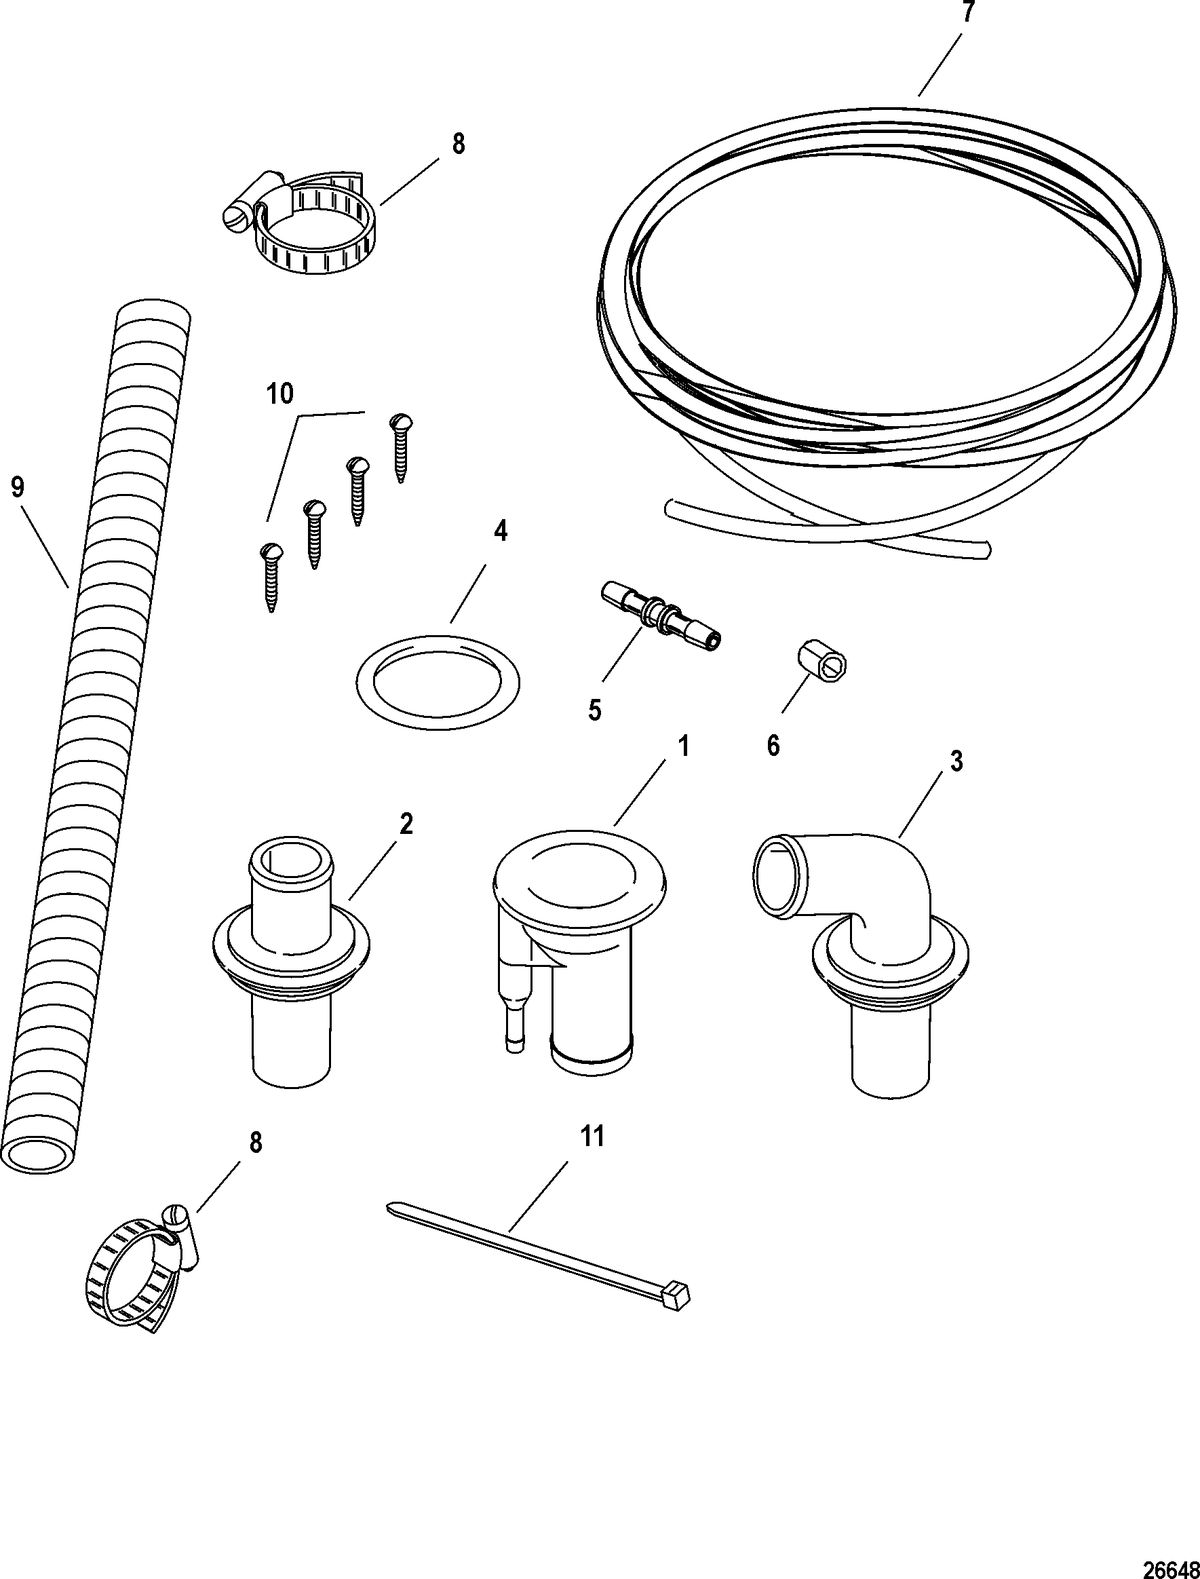 ACCESSORIES FUEL/OIL TANKS, LINES, FILTER KITS AND CORROSION Deck Oil Fill Kit(15969A09 / 10/ 11/ 13)